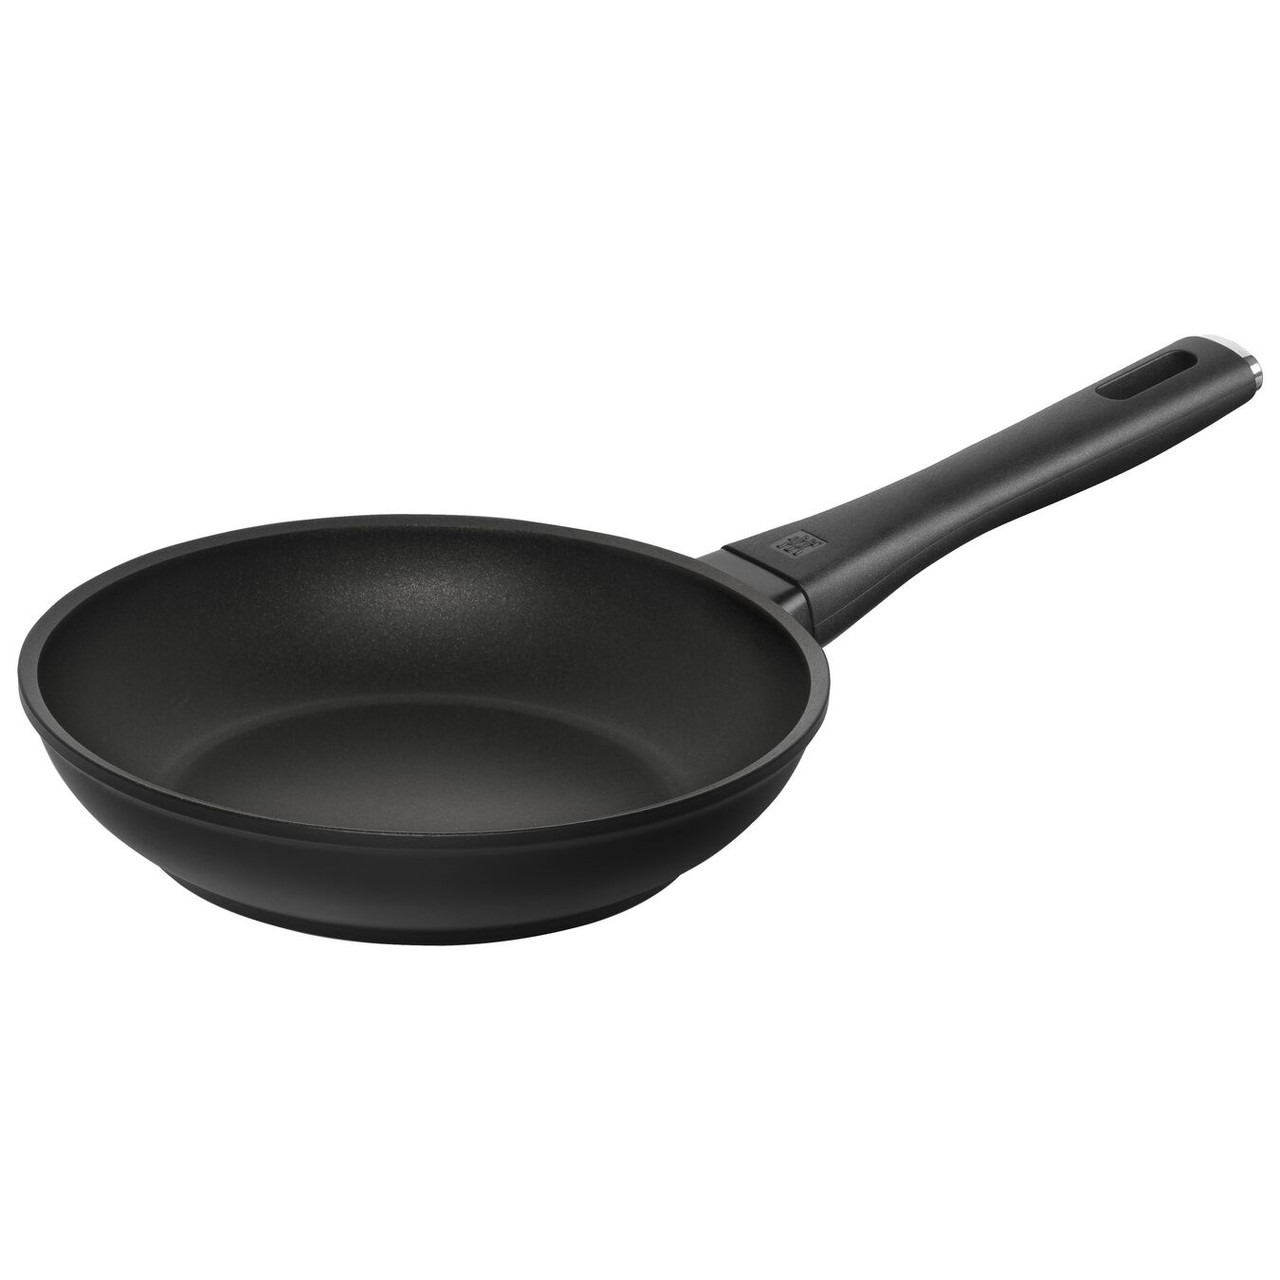 https://cdn11.bigcommerce.com/s-hccytny0od/images/stencil/1280x1280/products/3651/13029/zwilling-madura-plus-nonstick-fry-pan-8in__83692.1603290446.jpg?c=2?imbypass=on